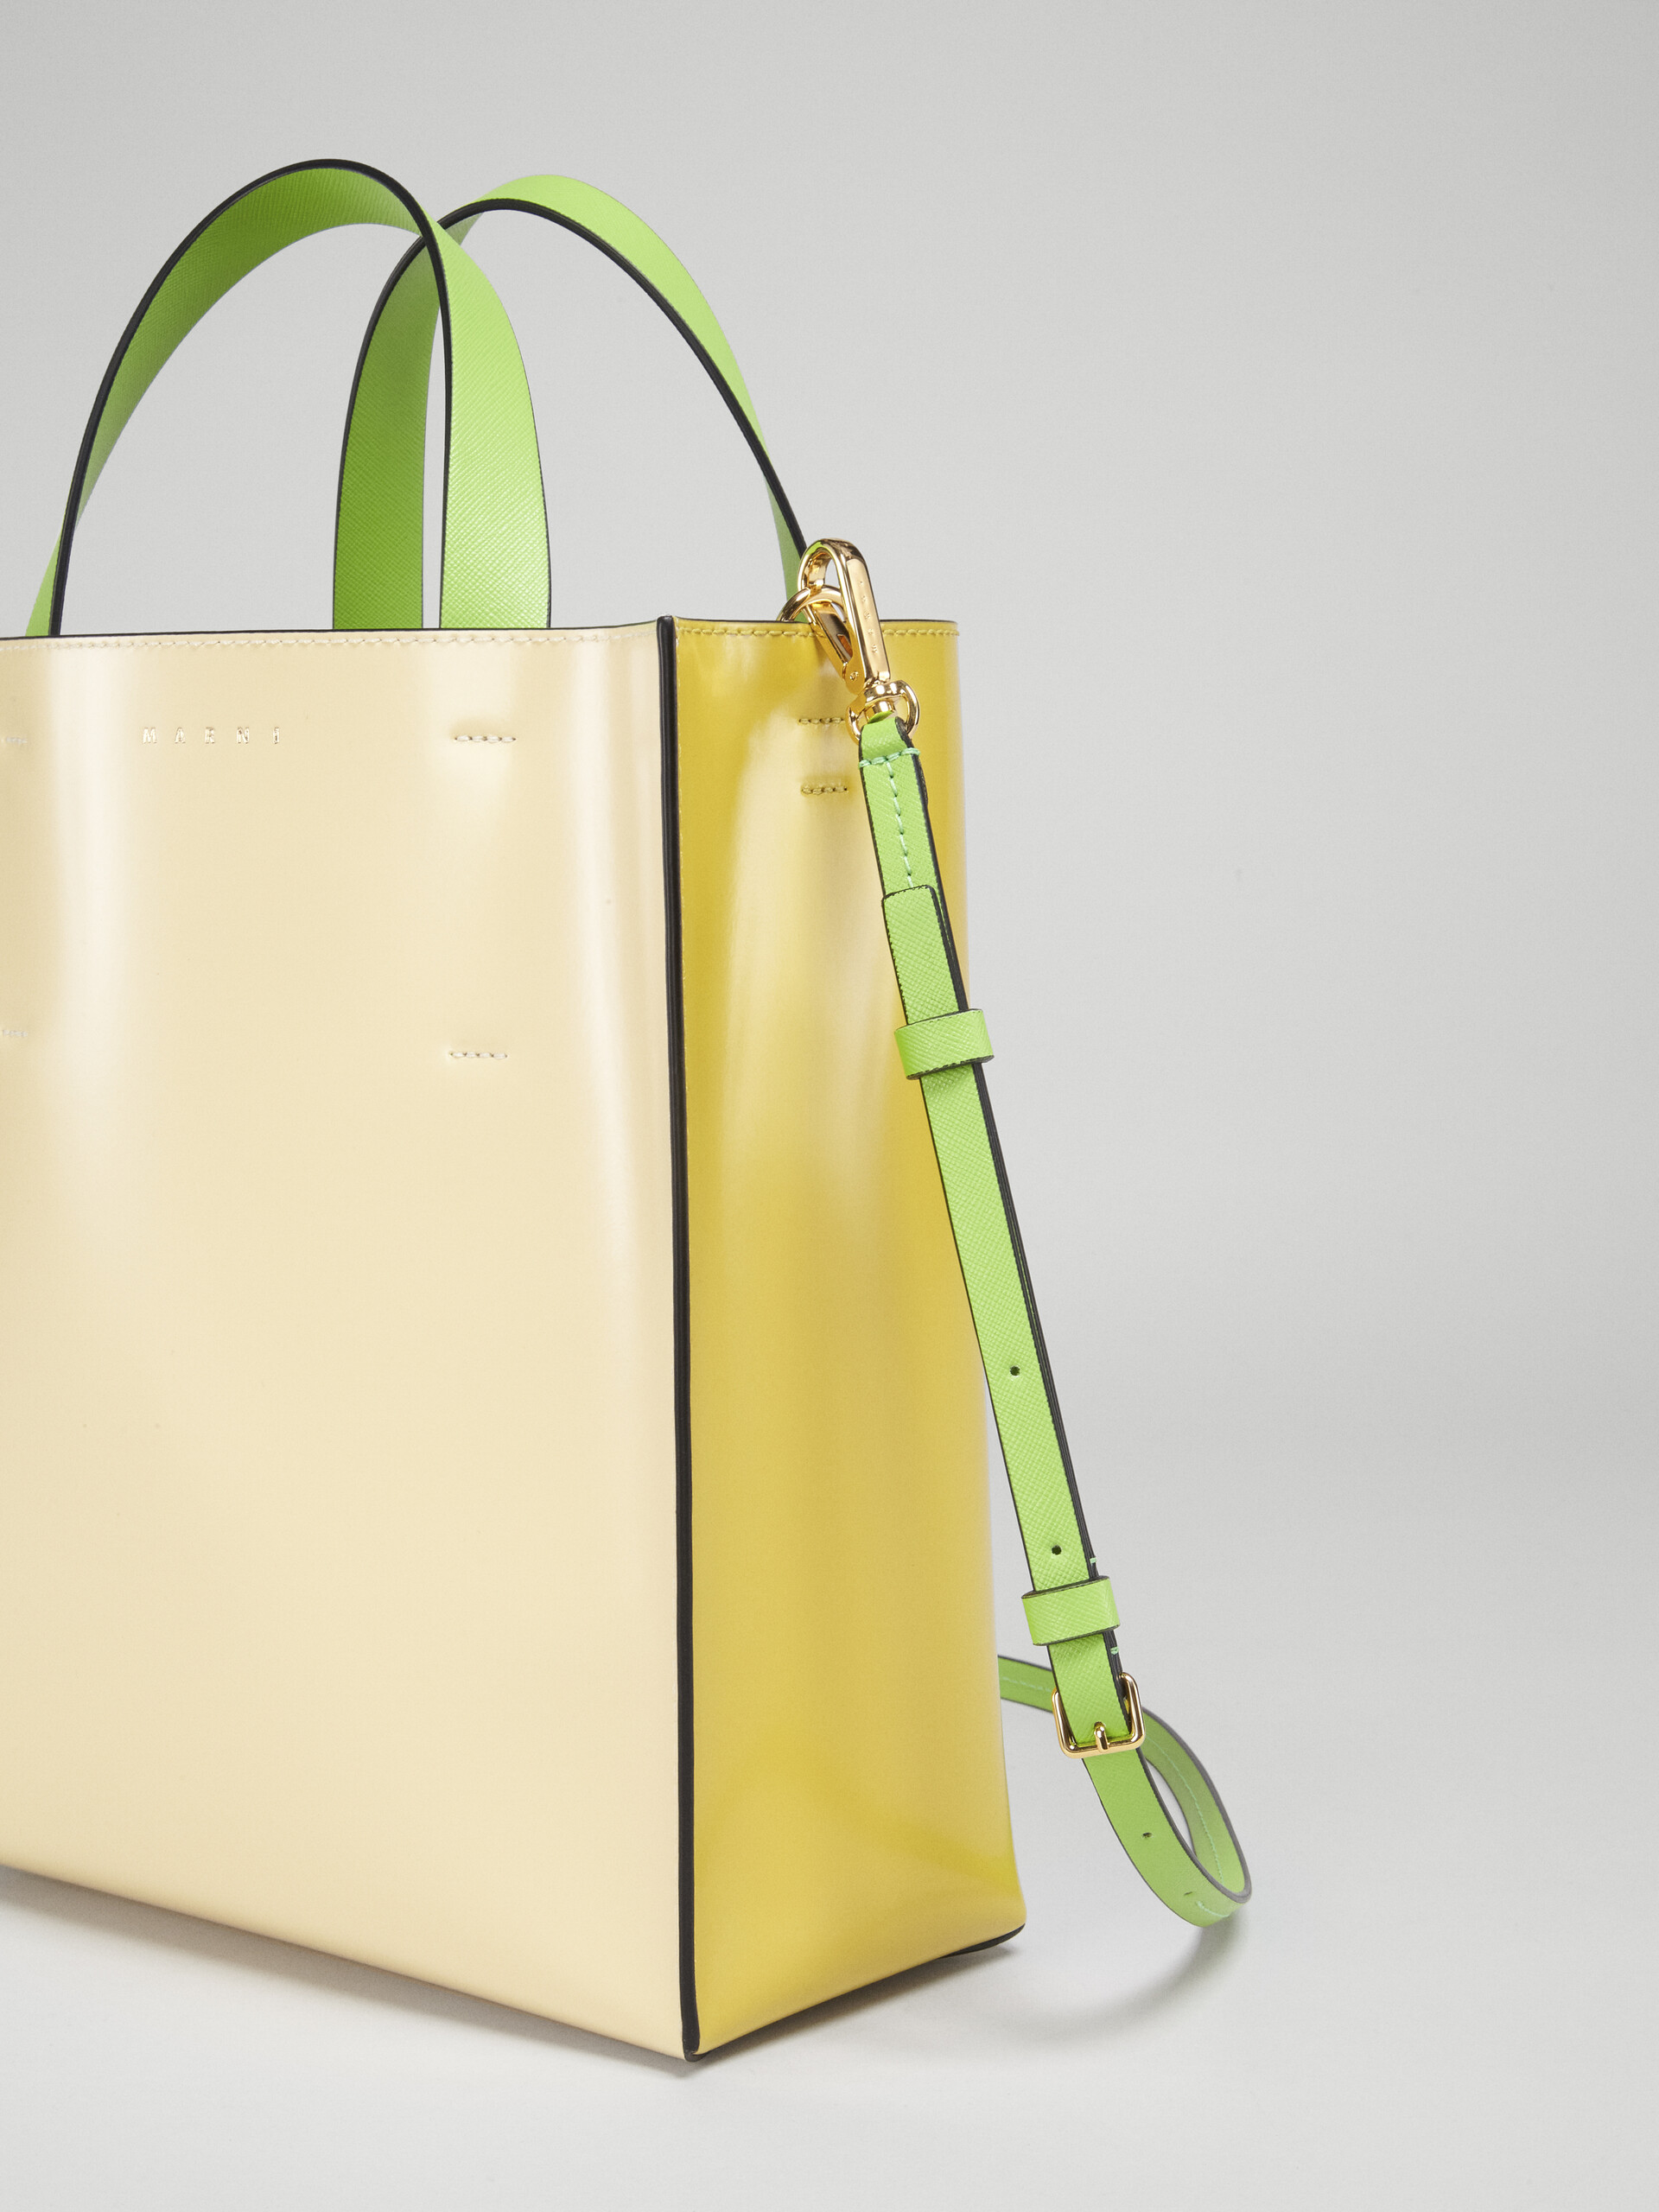 MUSEO small bag in yellow saffiano leather - Shopping Bags - Image 3